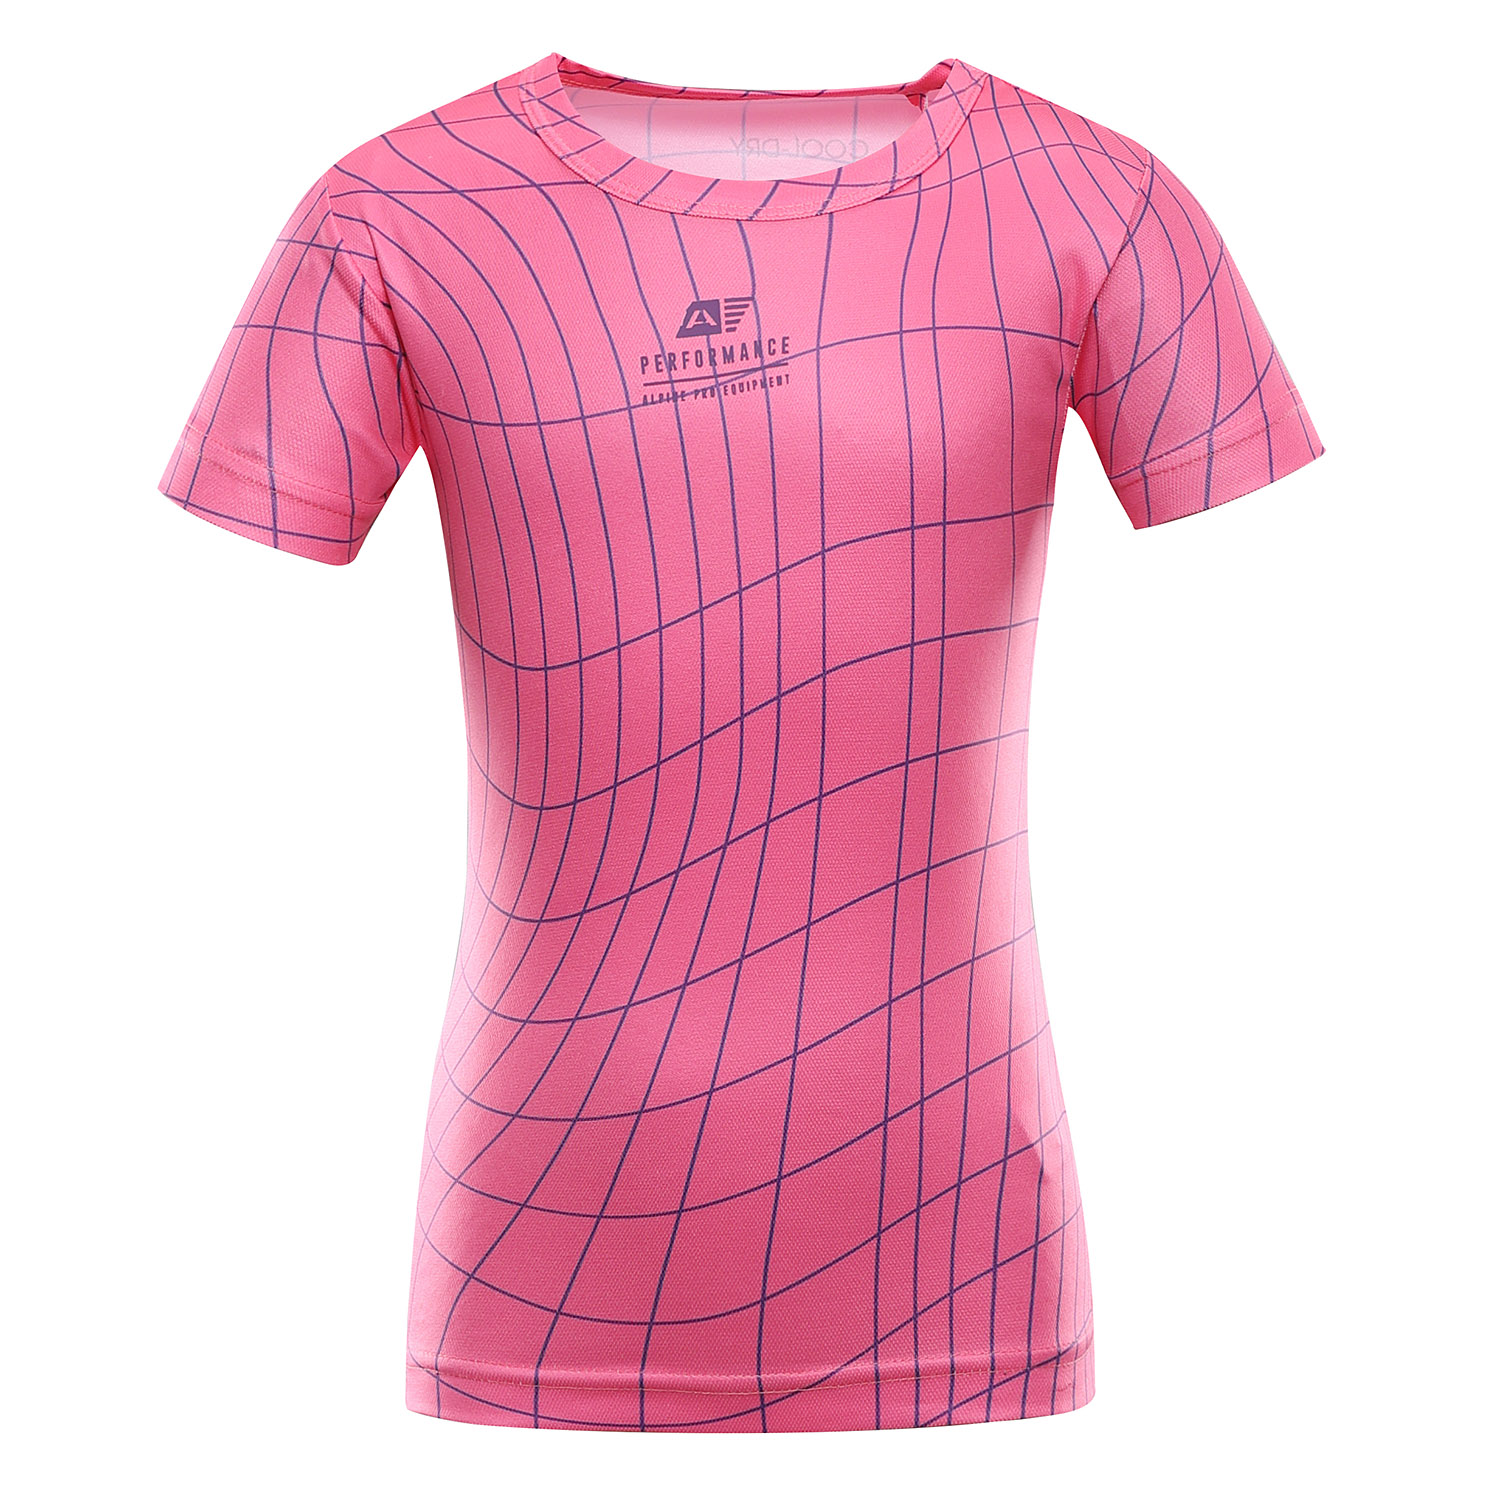 Children's quick-drying T-shirt ALPINE PRO BASIKO neon knockout pink variant PA